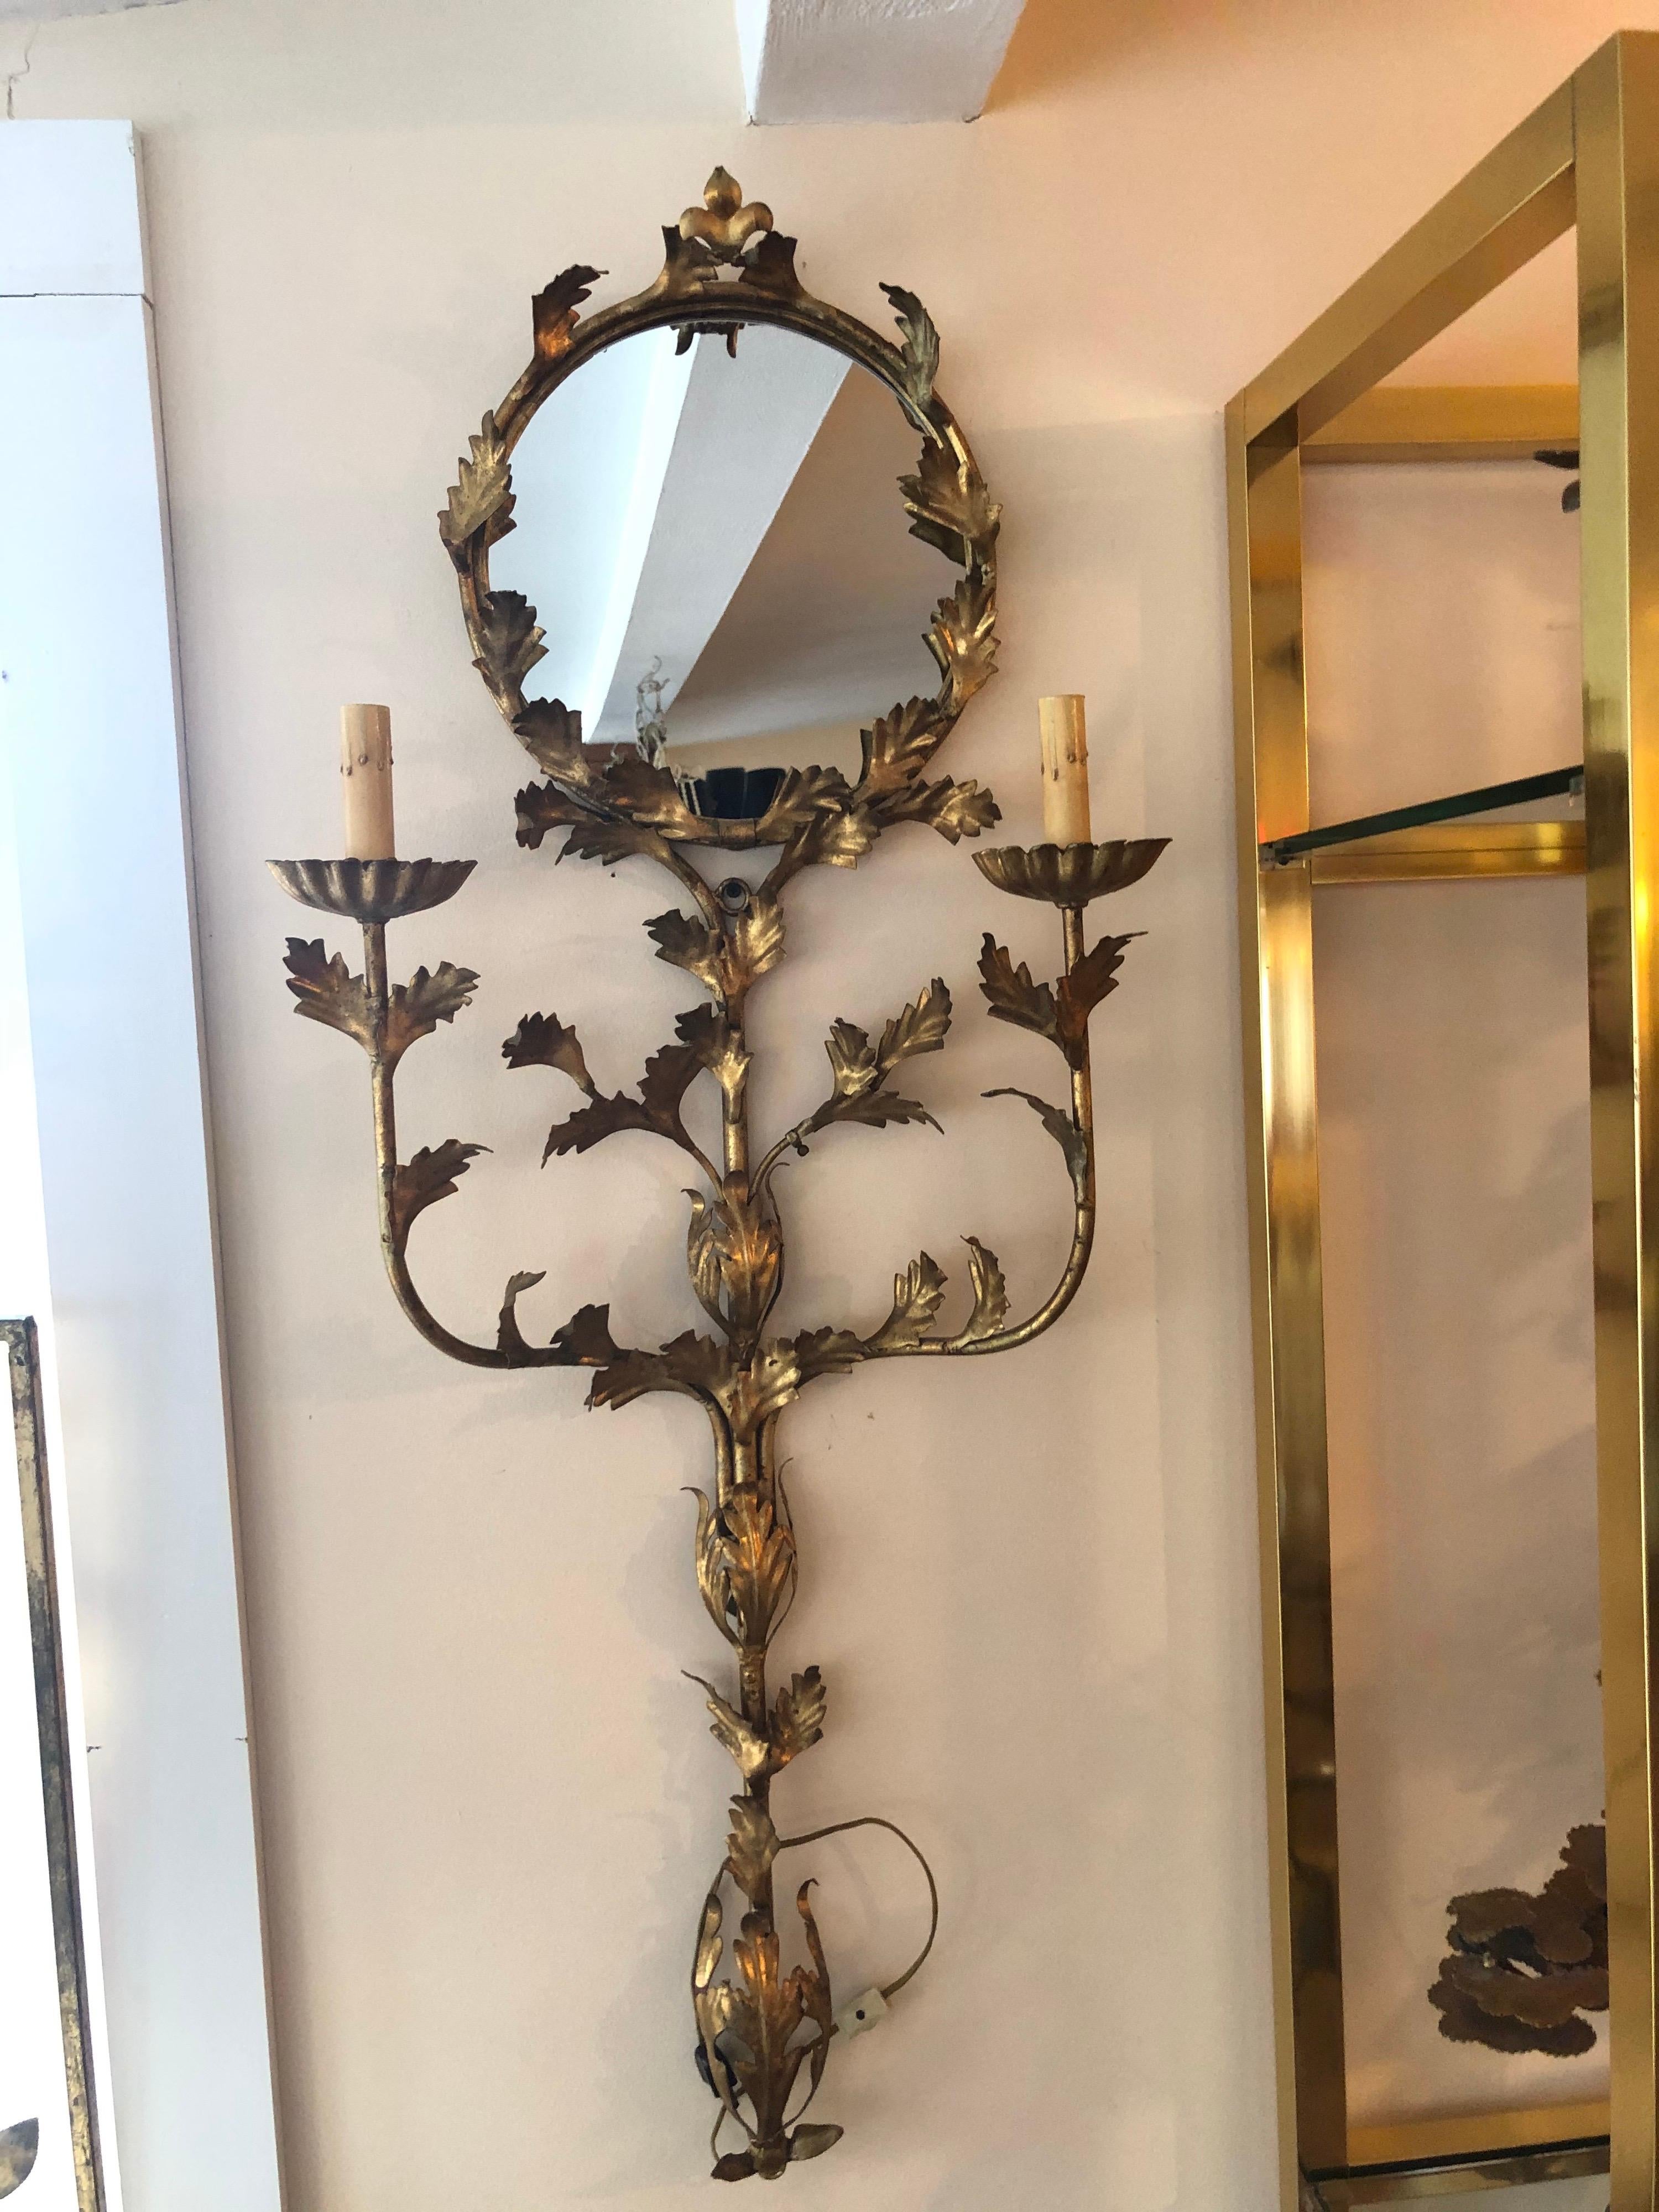 Italian floral gilt iron mirrored wall sconce. Unique, one of a kind, floral wall sconce. Circular mirror in the center surrounded by gilt iron leaves. Electrified with two candle light arms flanking the mirror. Plug in cord for wall outlet but